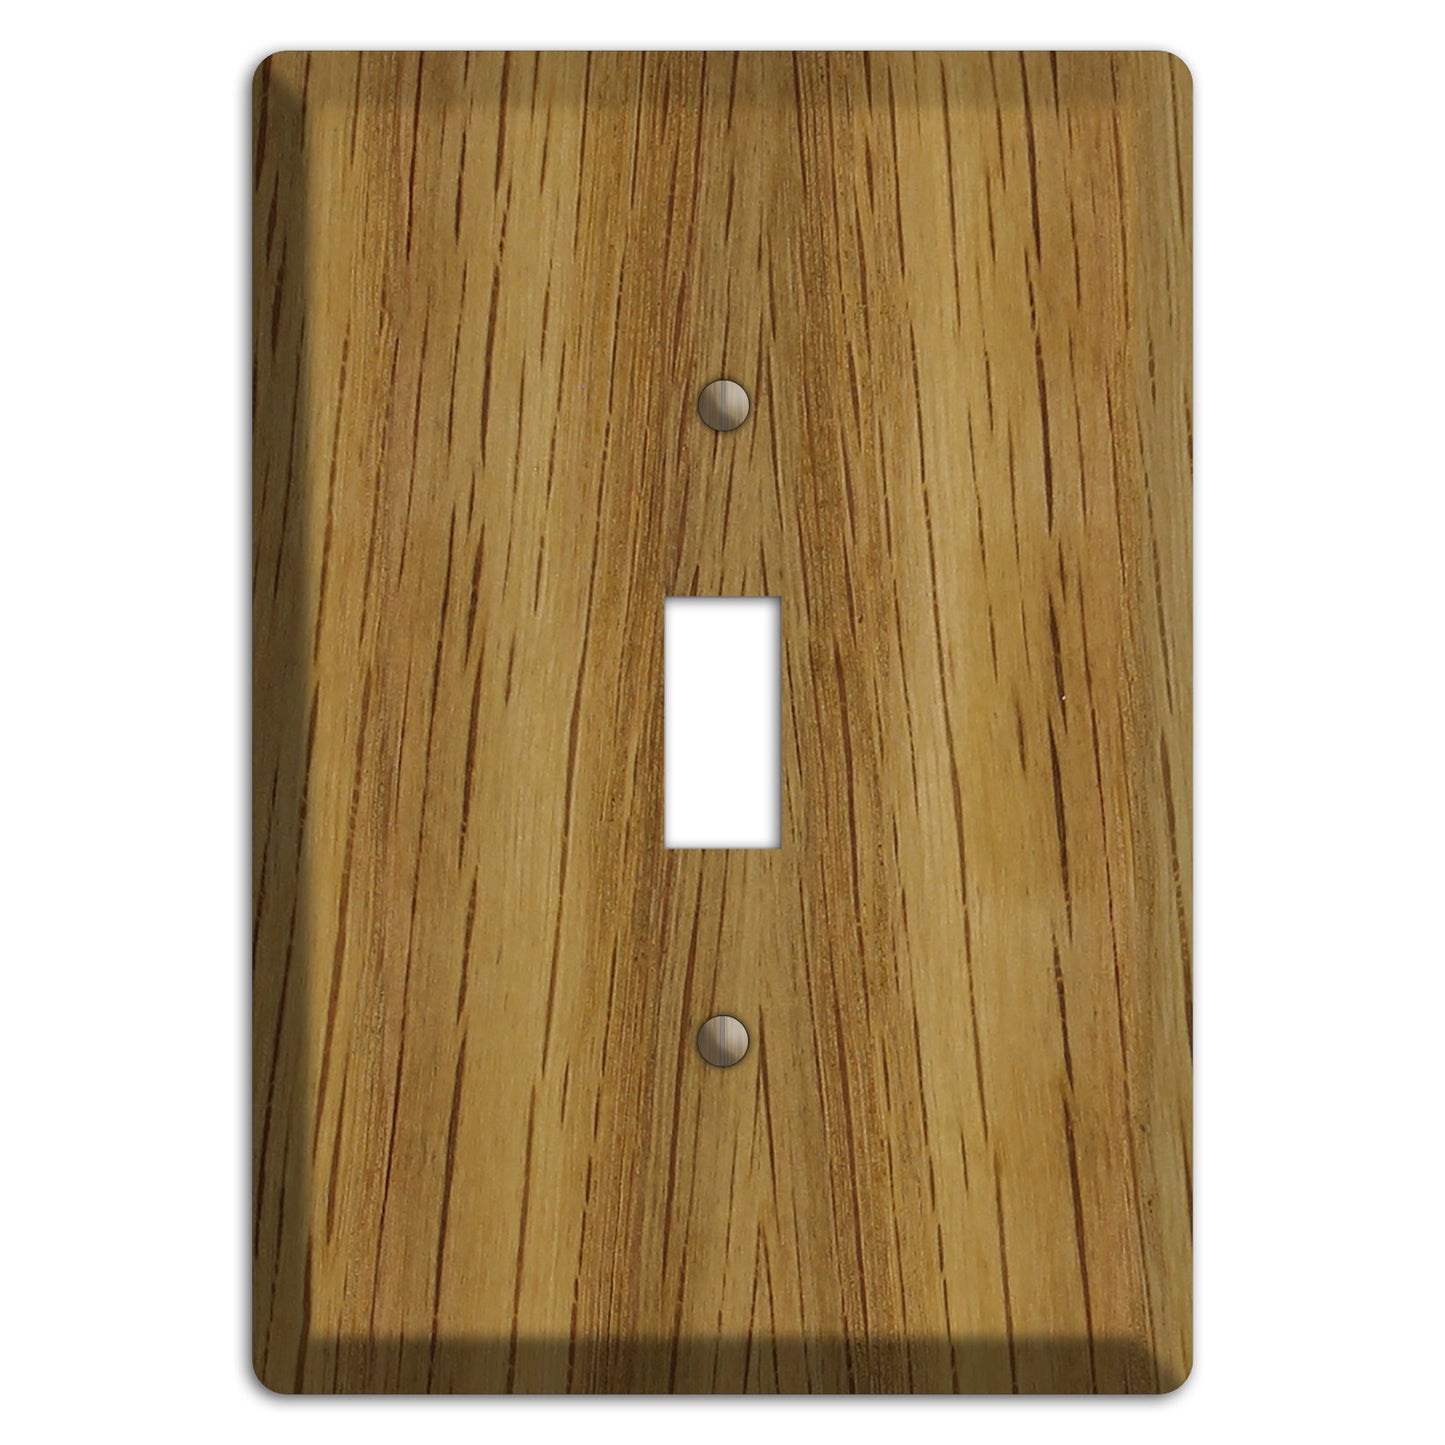 Unfinished White Oak Wood Cover Plates